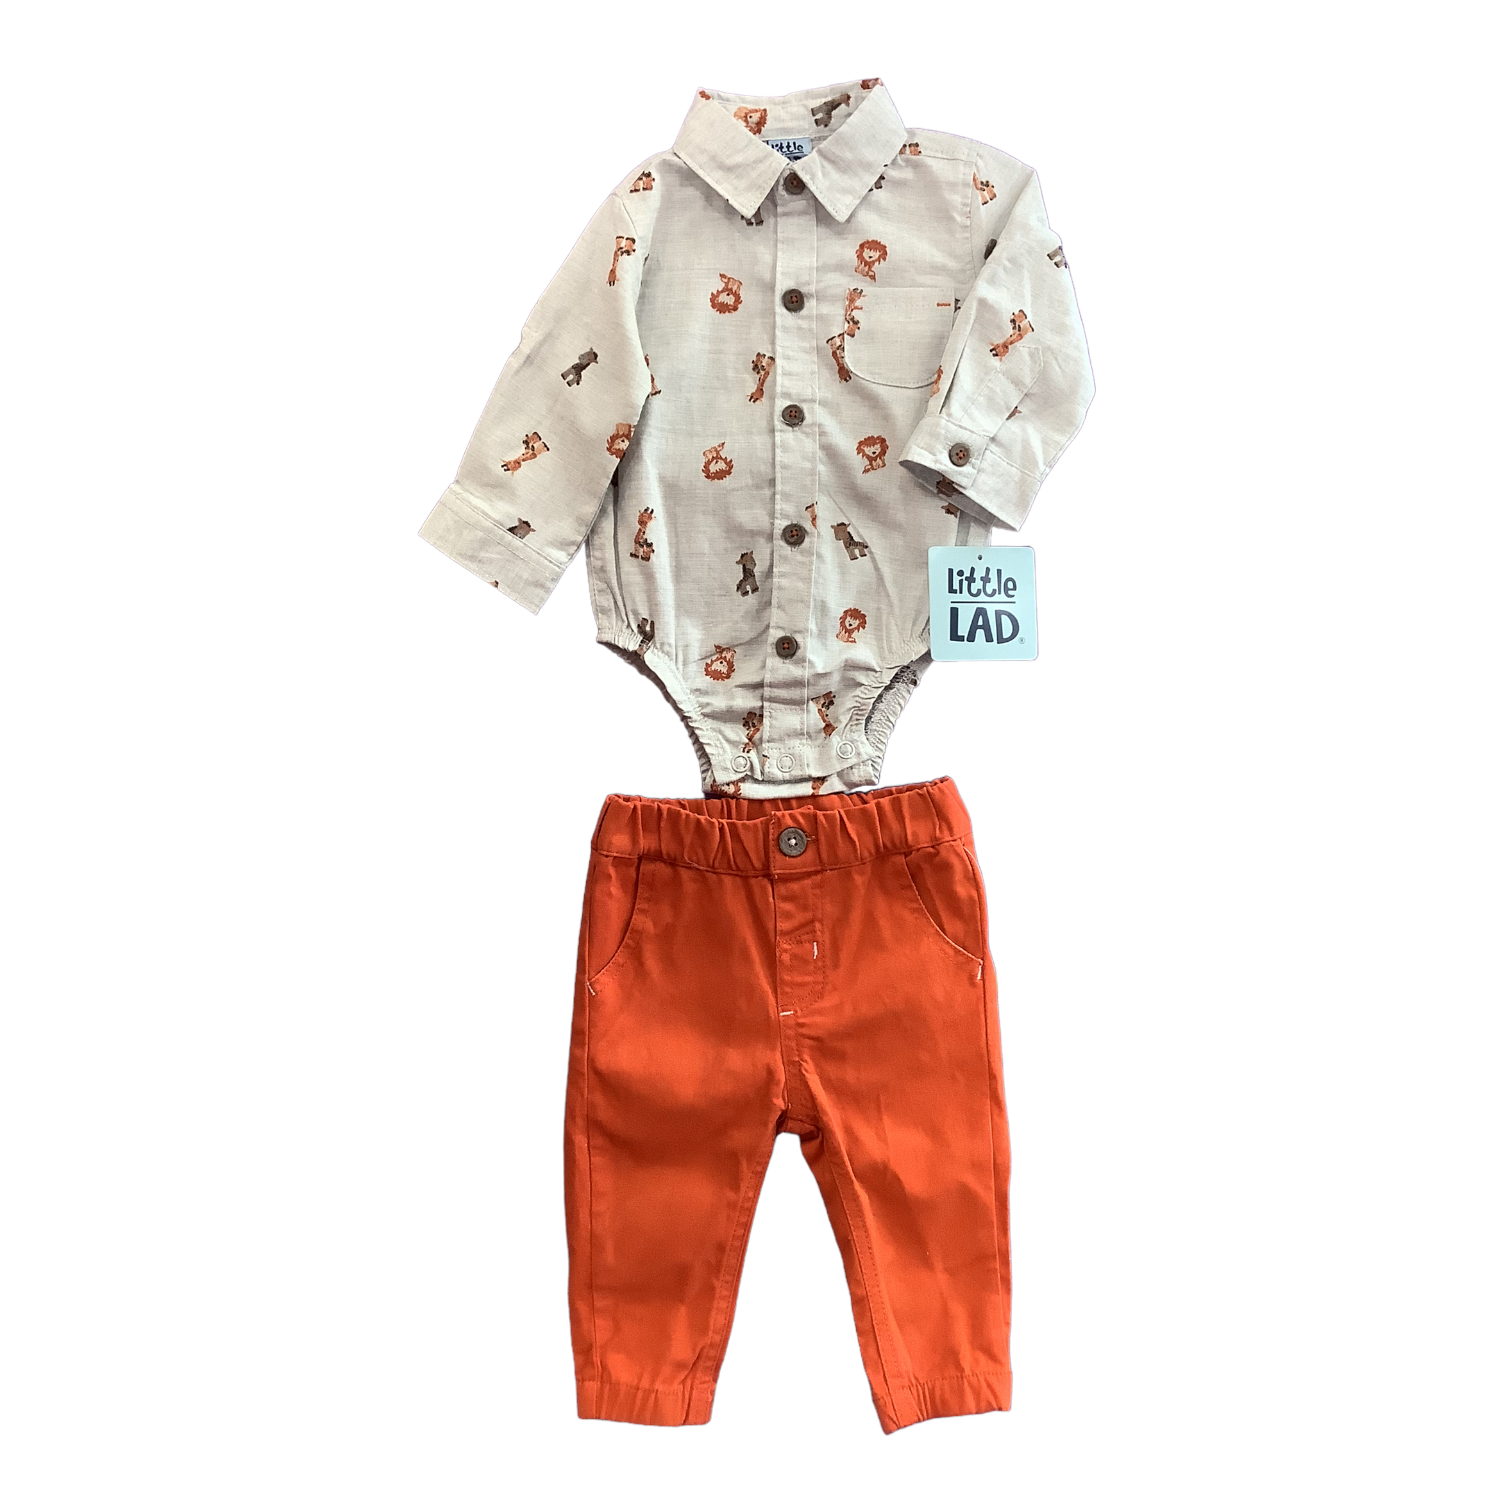 Little Lad. 3-6 Months. 2 Pc Outfit. NWT